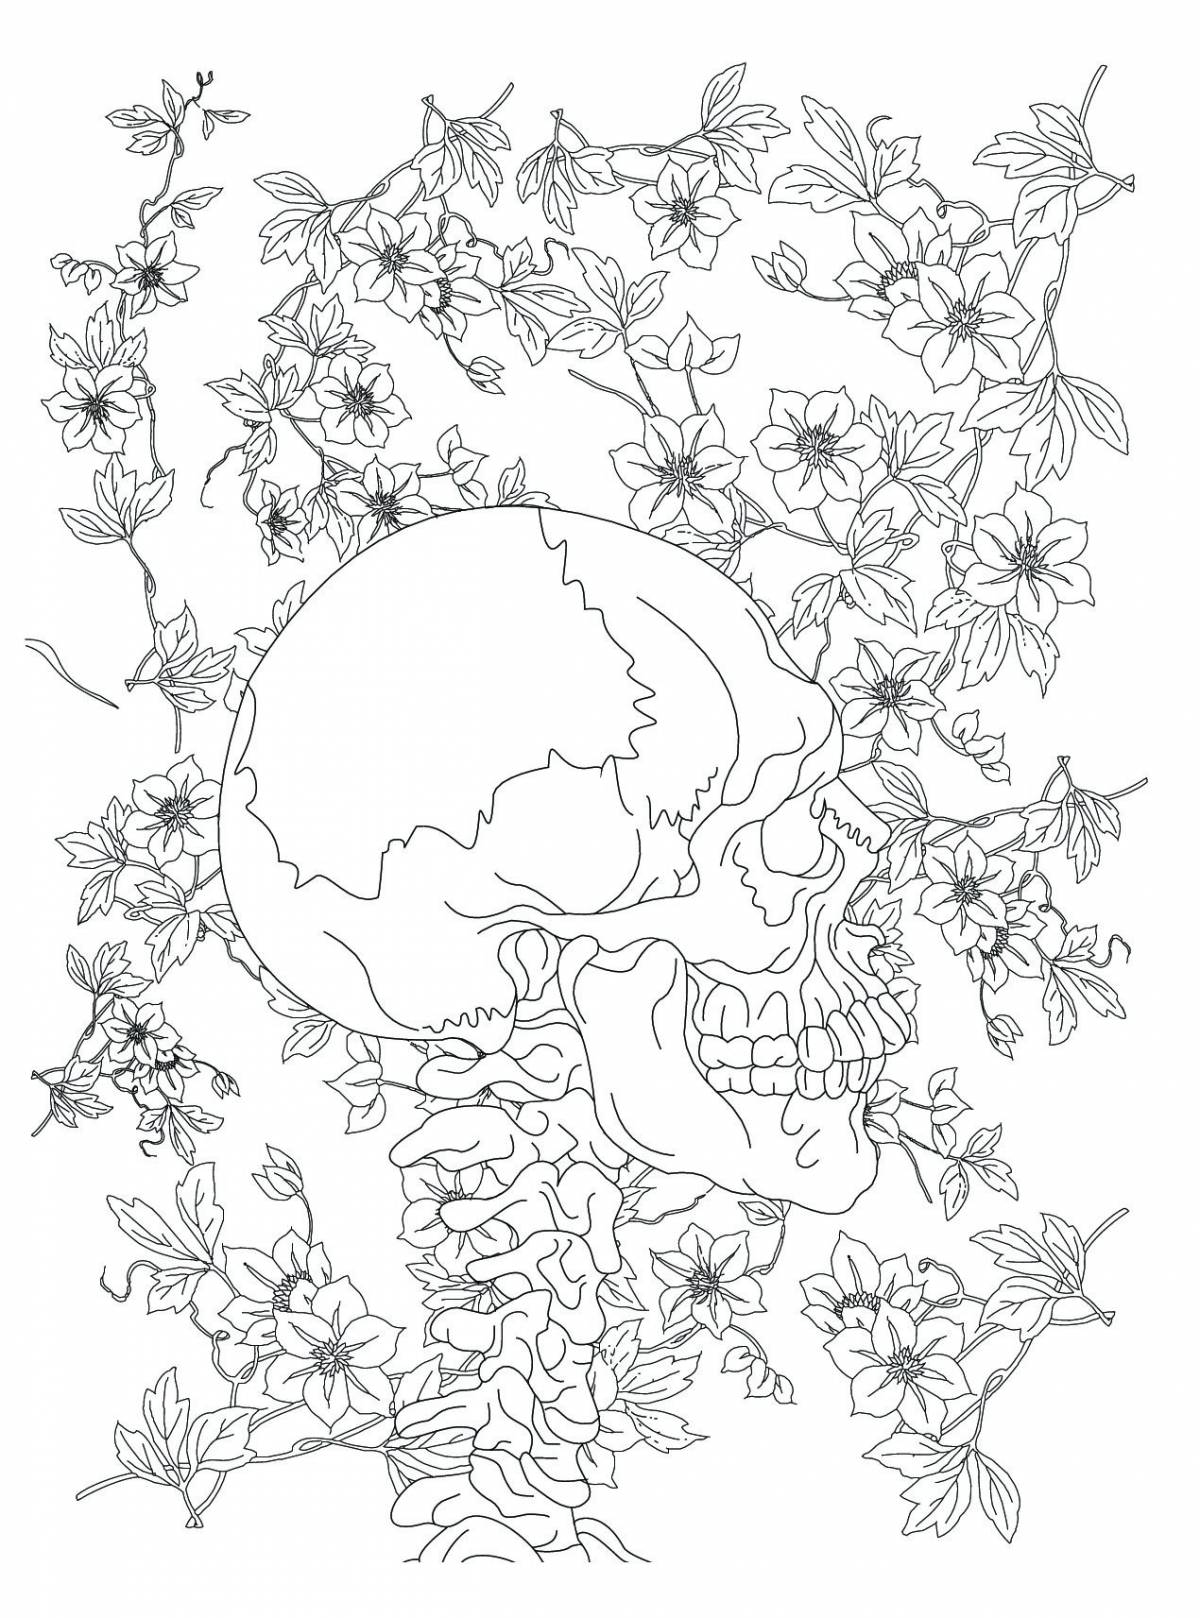 Nasty and disgusting horror coloring page